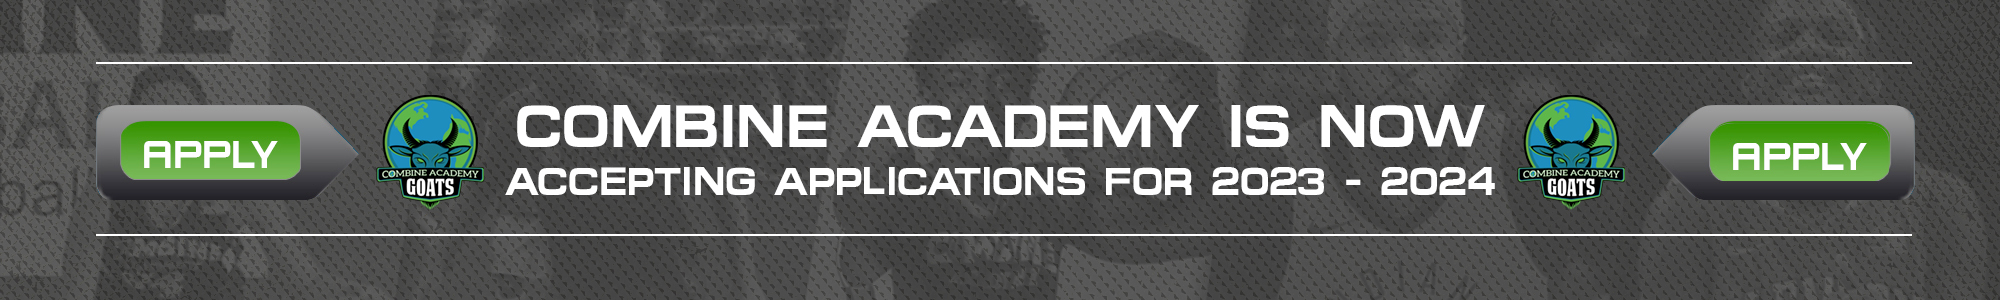 Combine Academy Accepting Applications 23-24